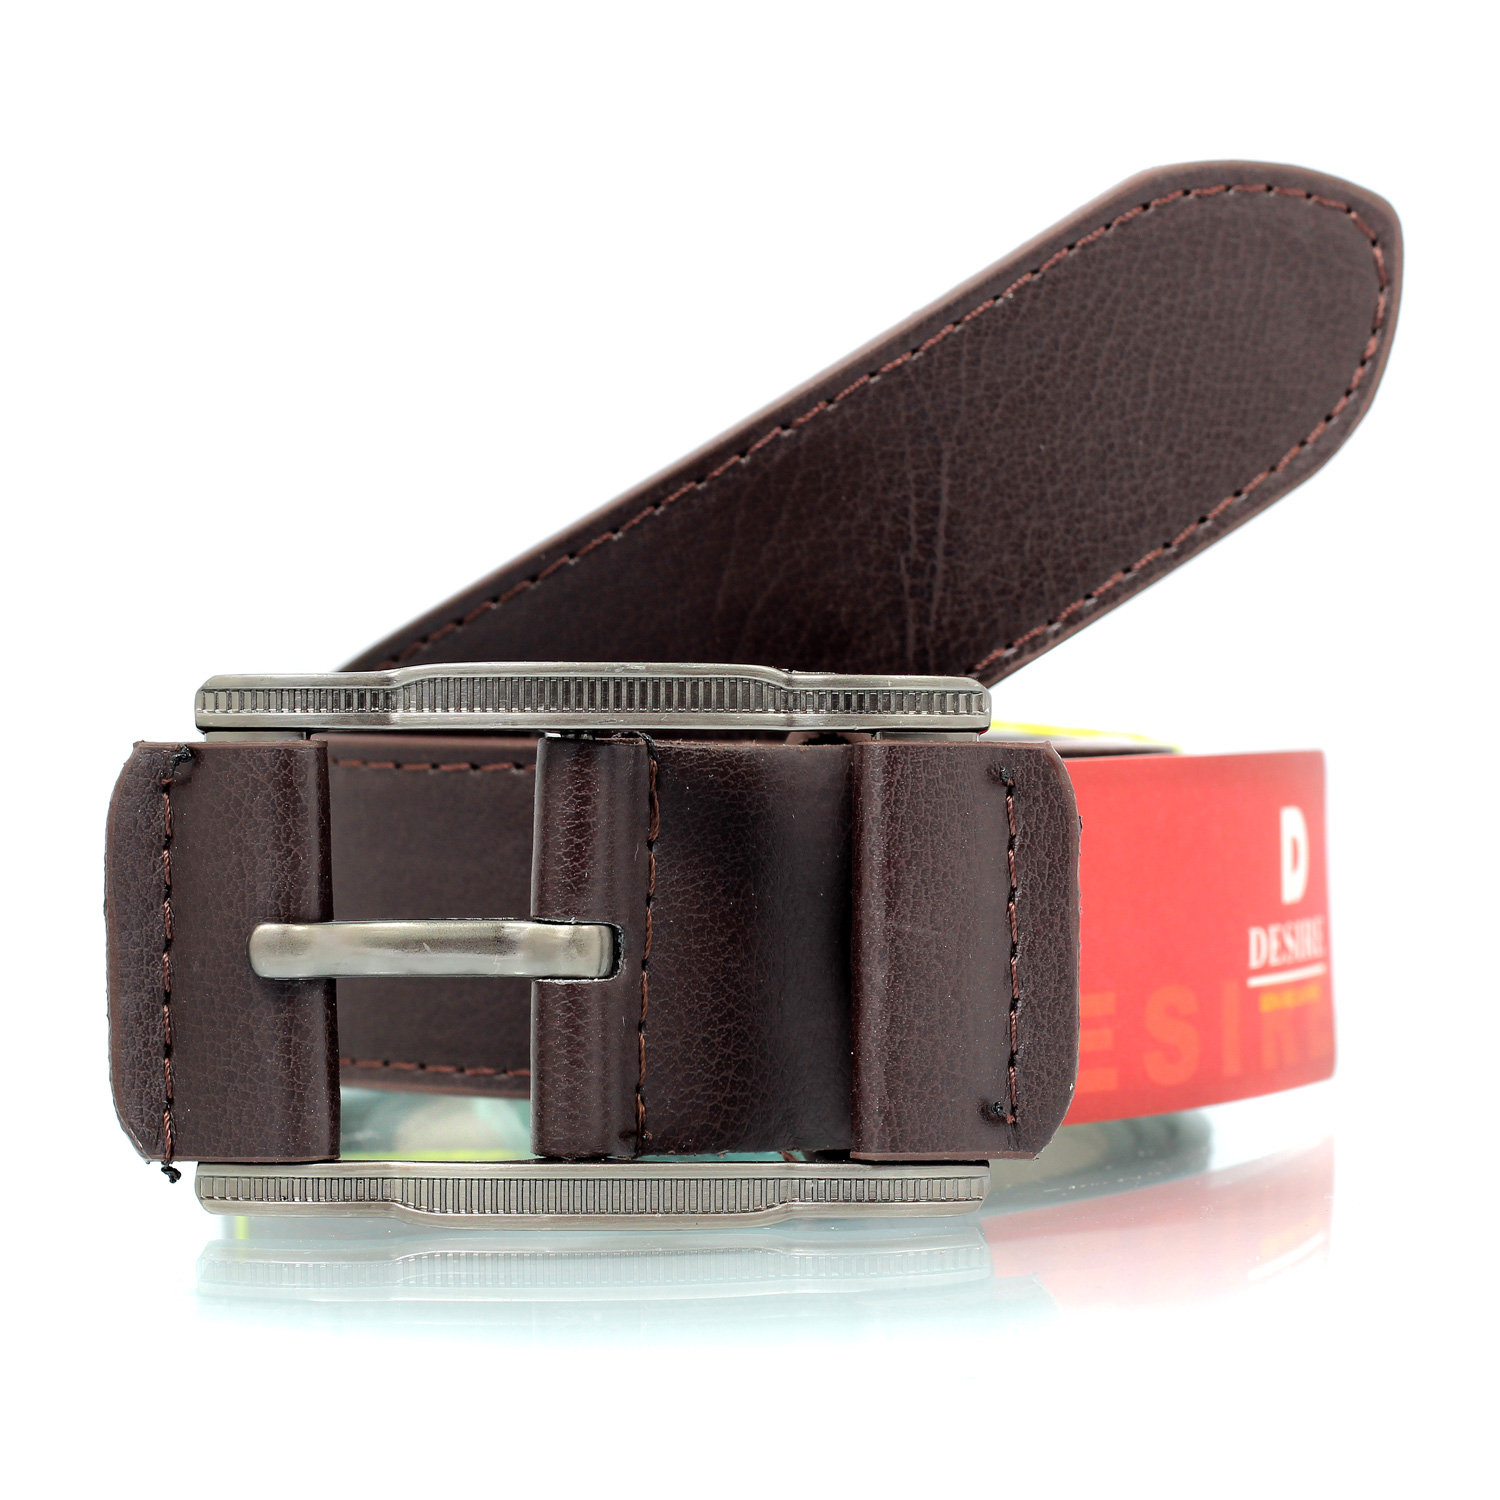 Double stitched brown genuine textured leather belt with designer buckle